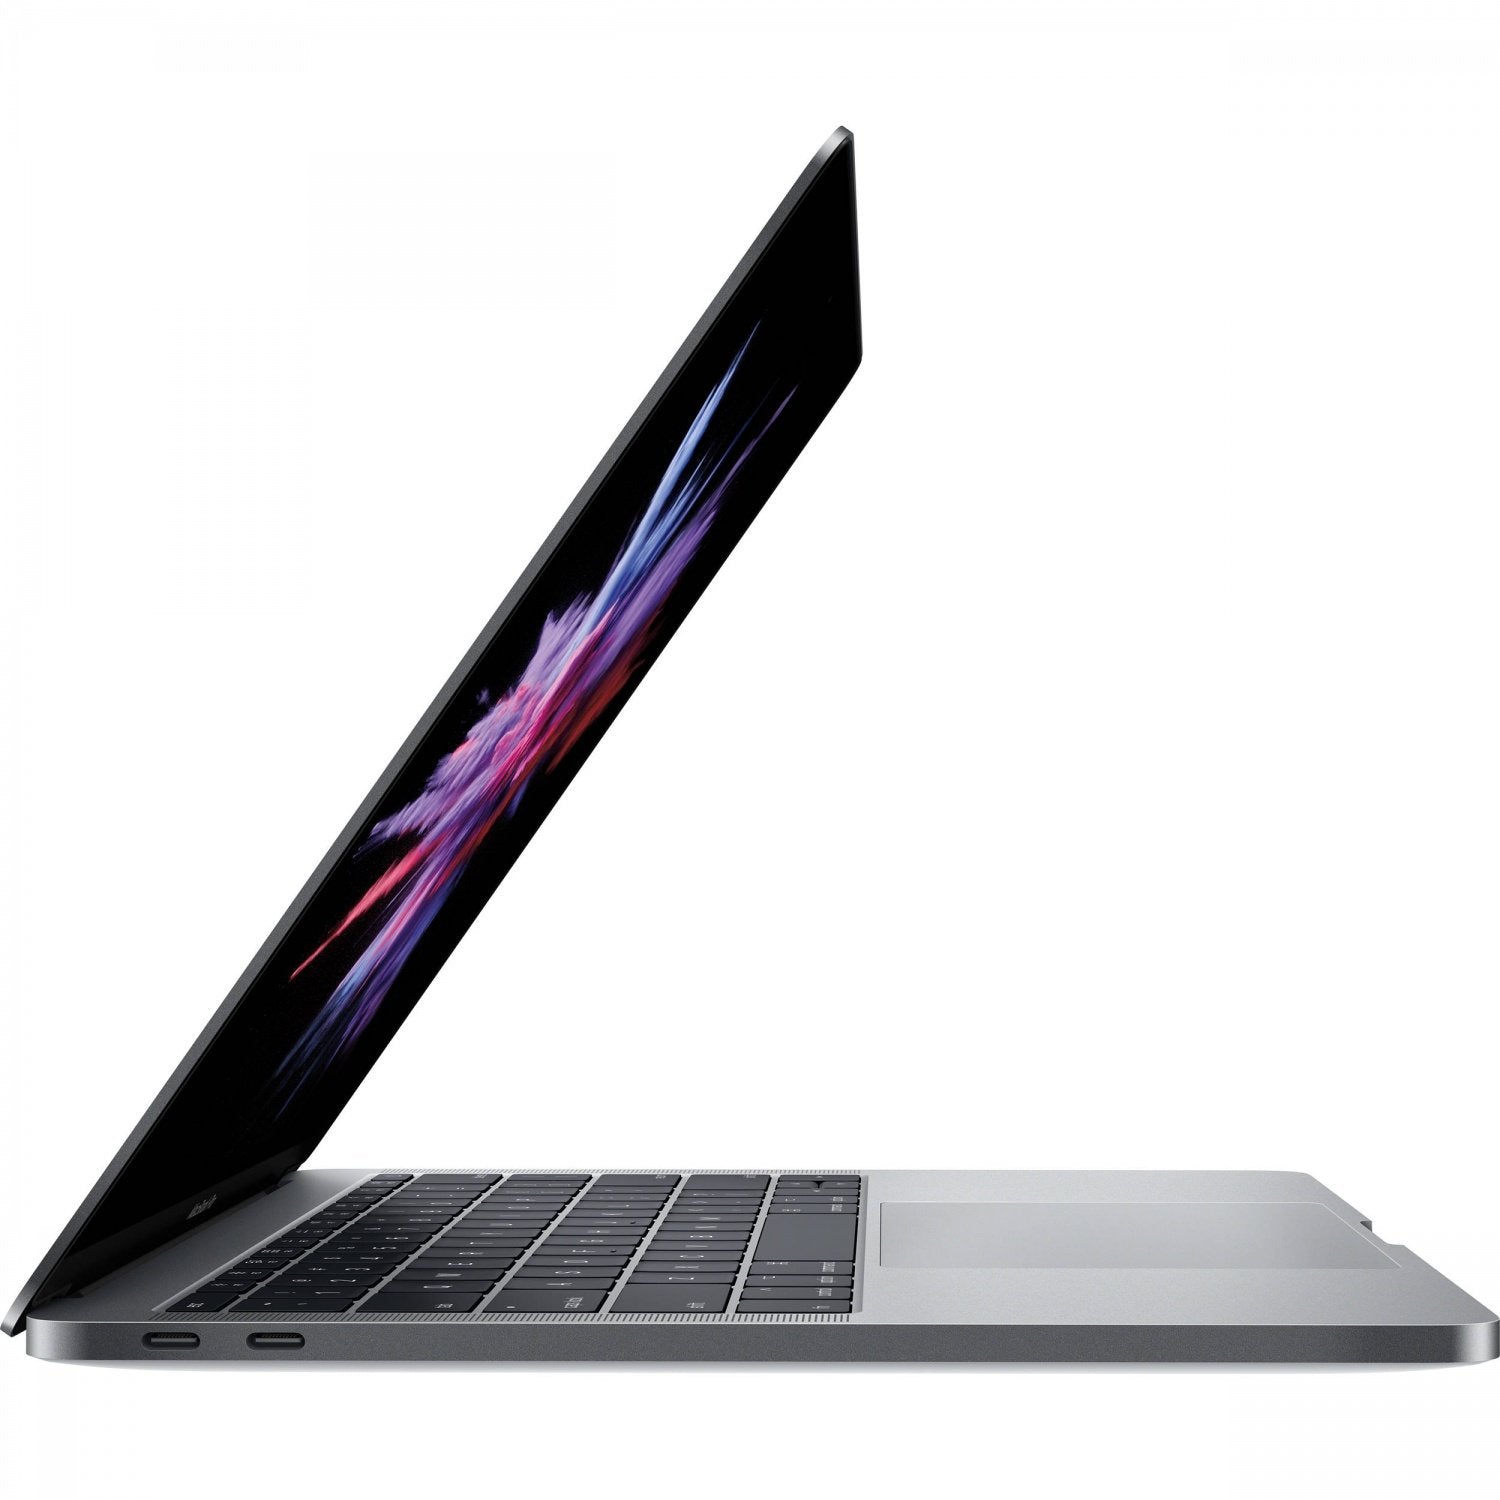 MacBook Pro 15" Touch Bar 2019 | i7 | 16GB | 256GB SSD Space | Preloved